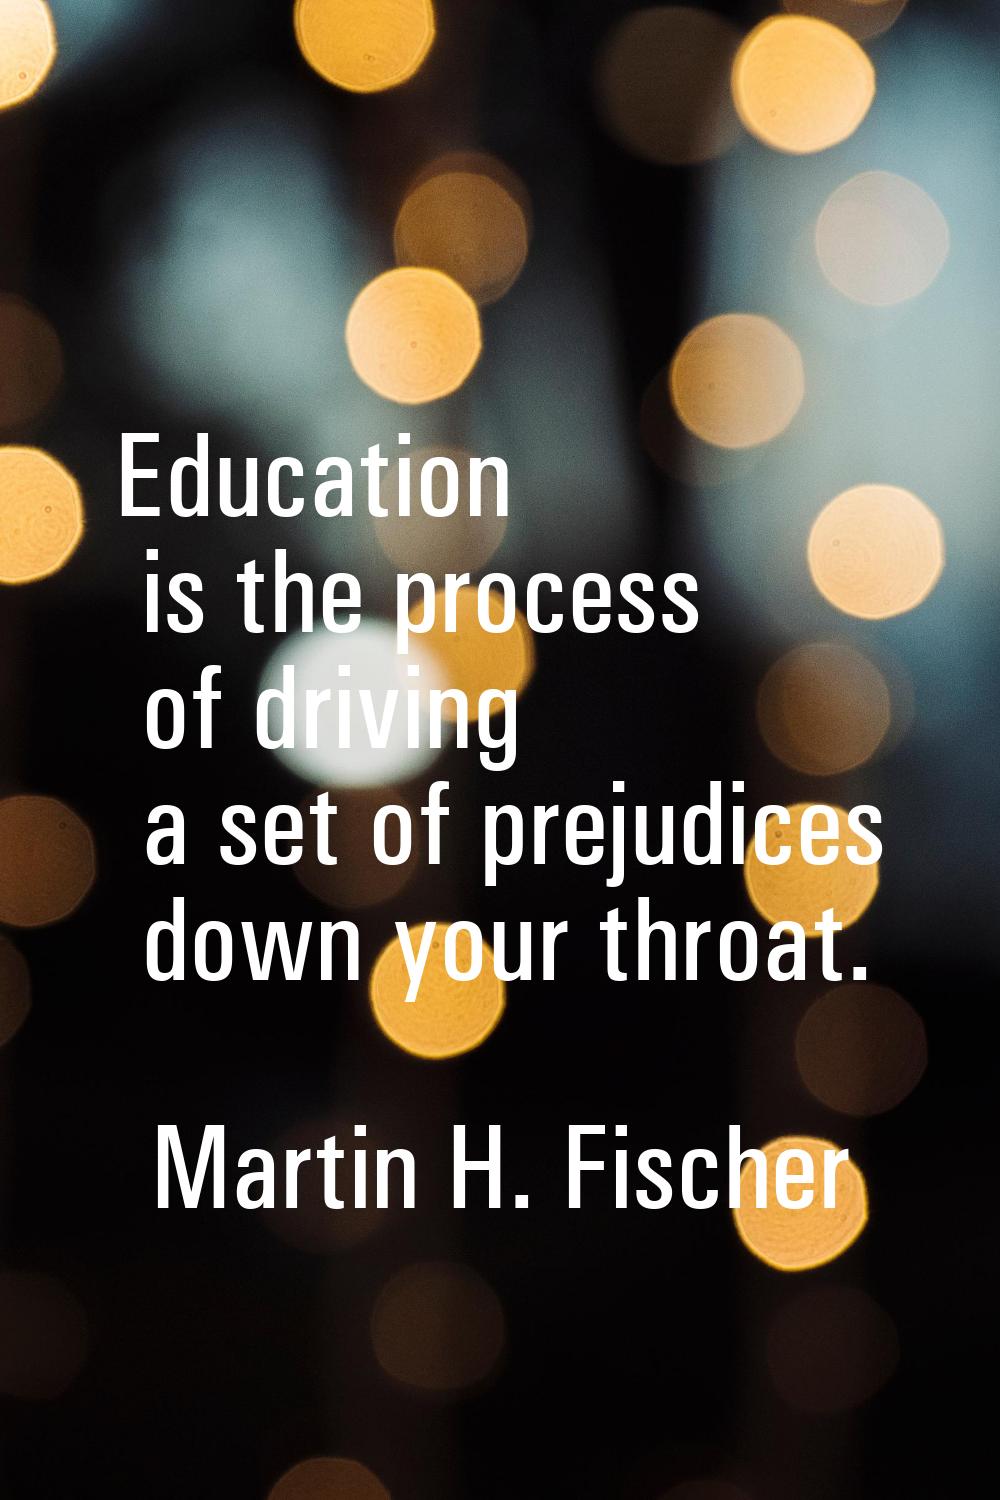 Education is the process of driving a set of prejudices down your throat.